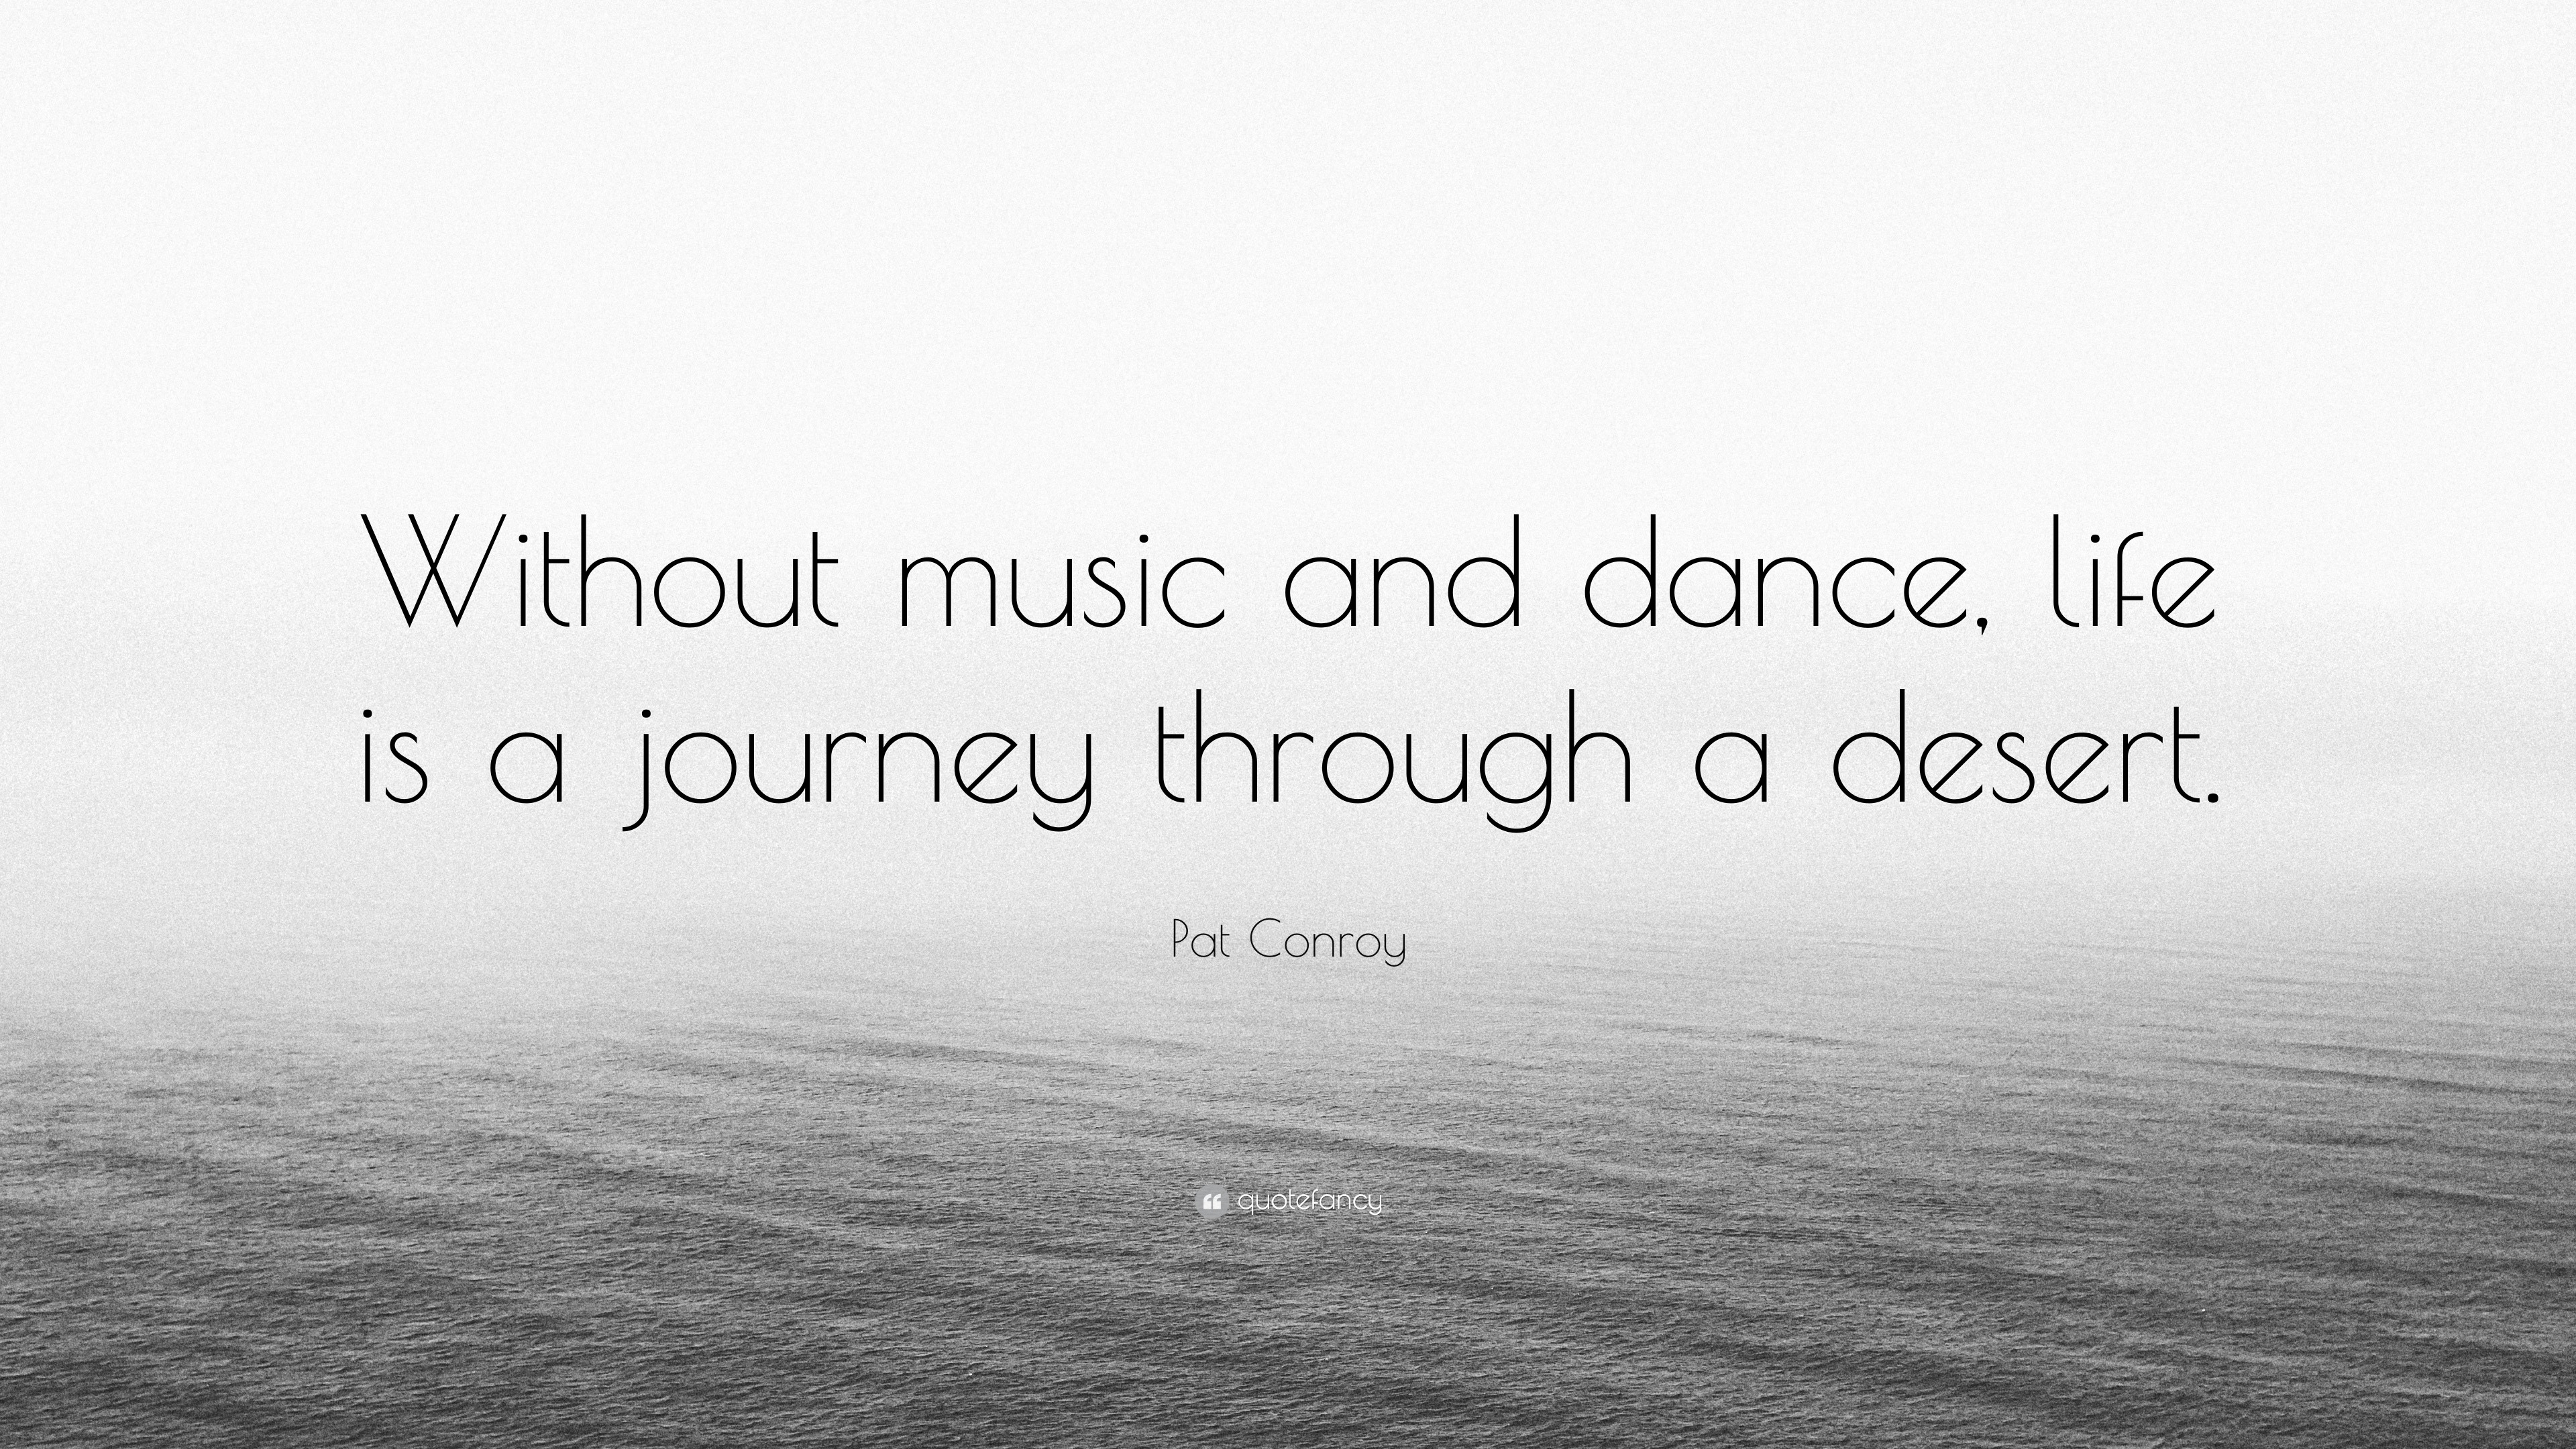 Pat Conroy Quote “Without music and dance life is a journey through a